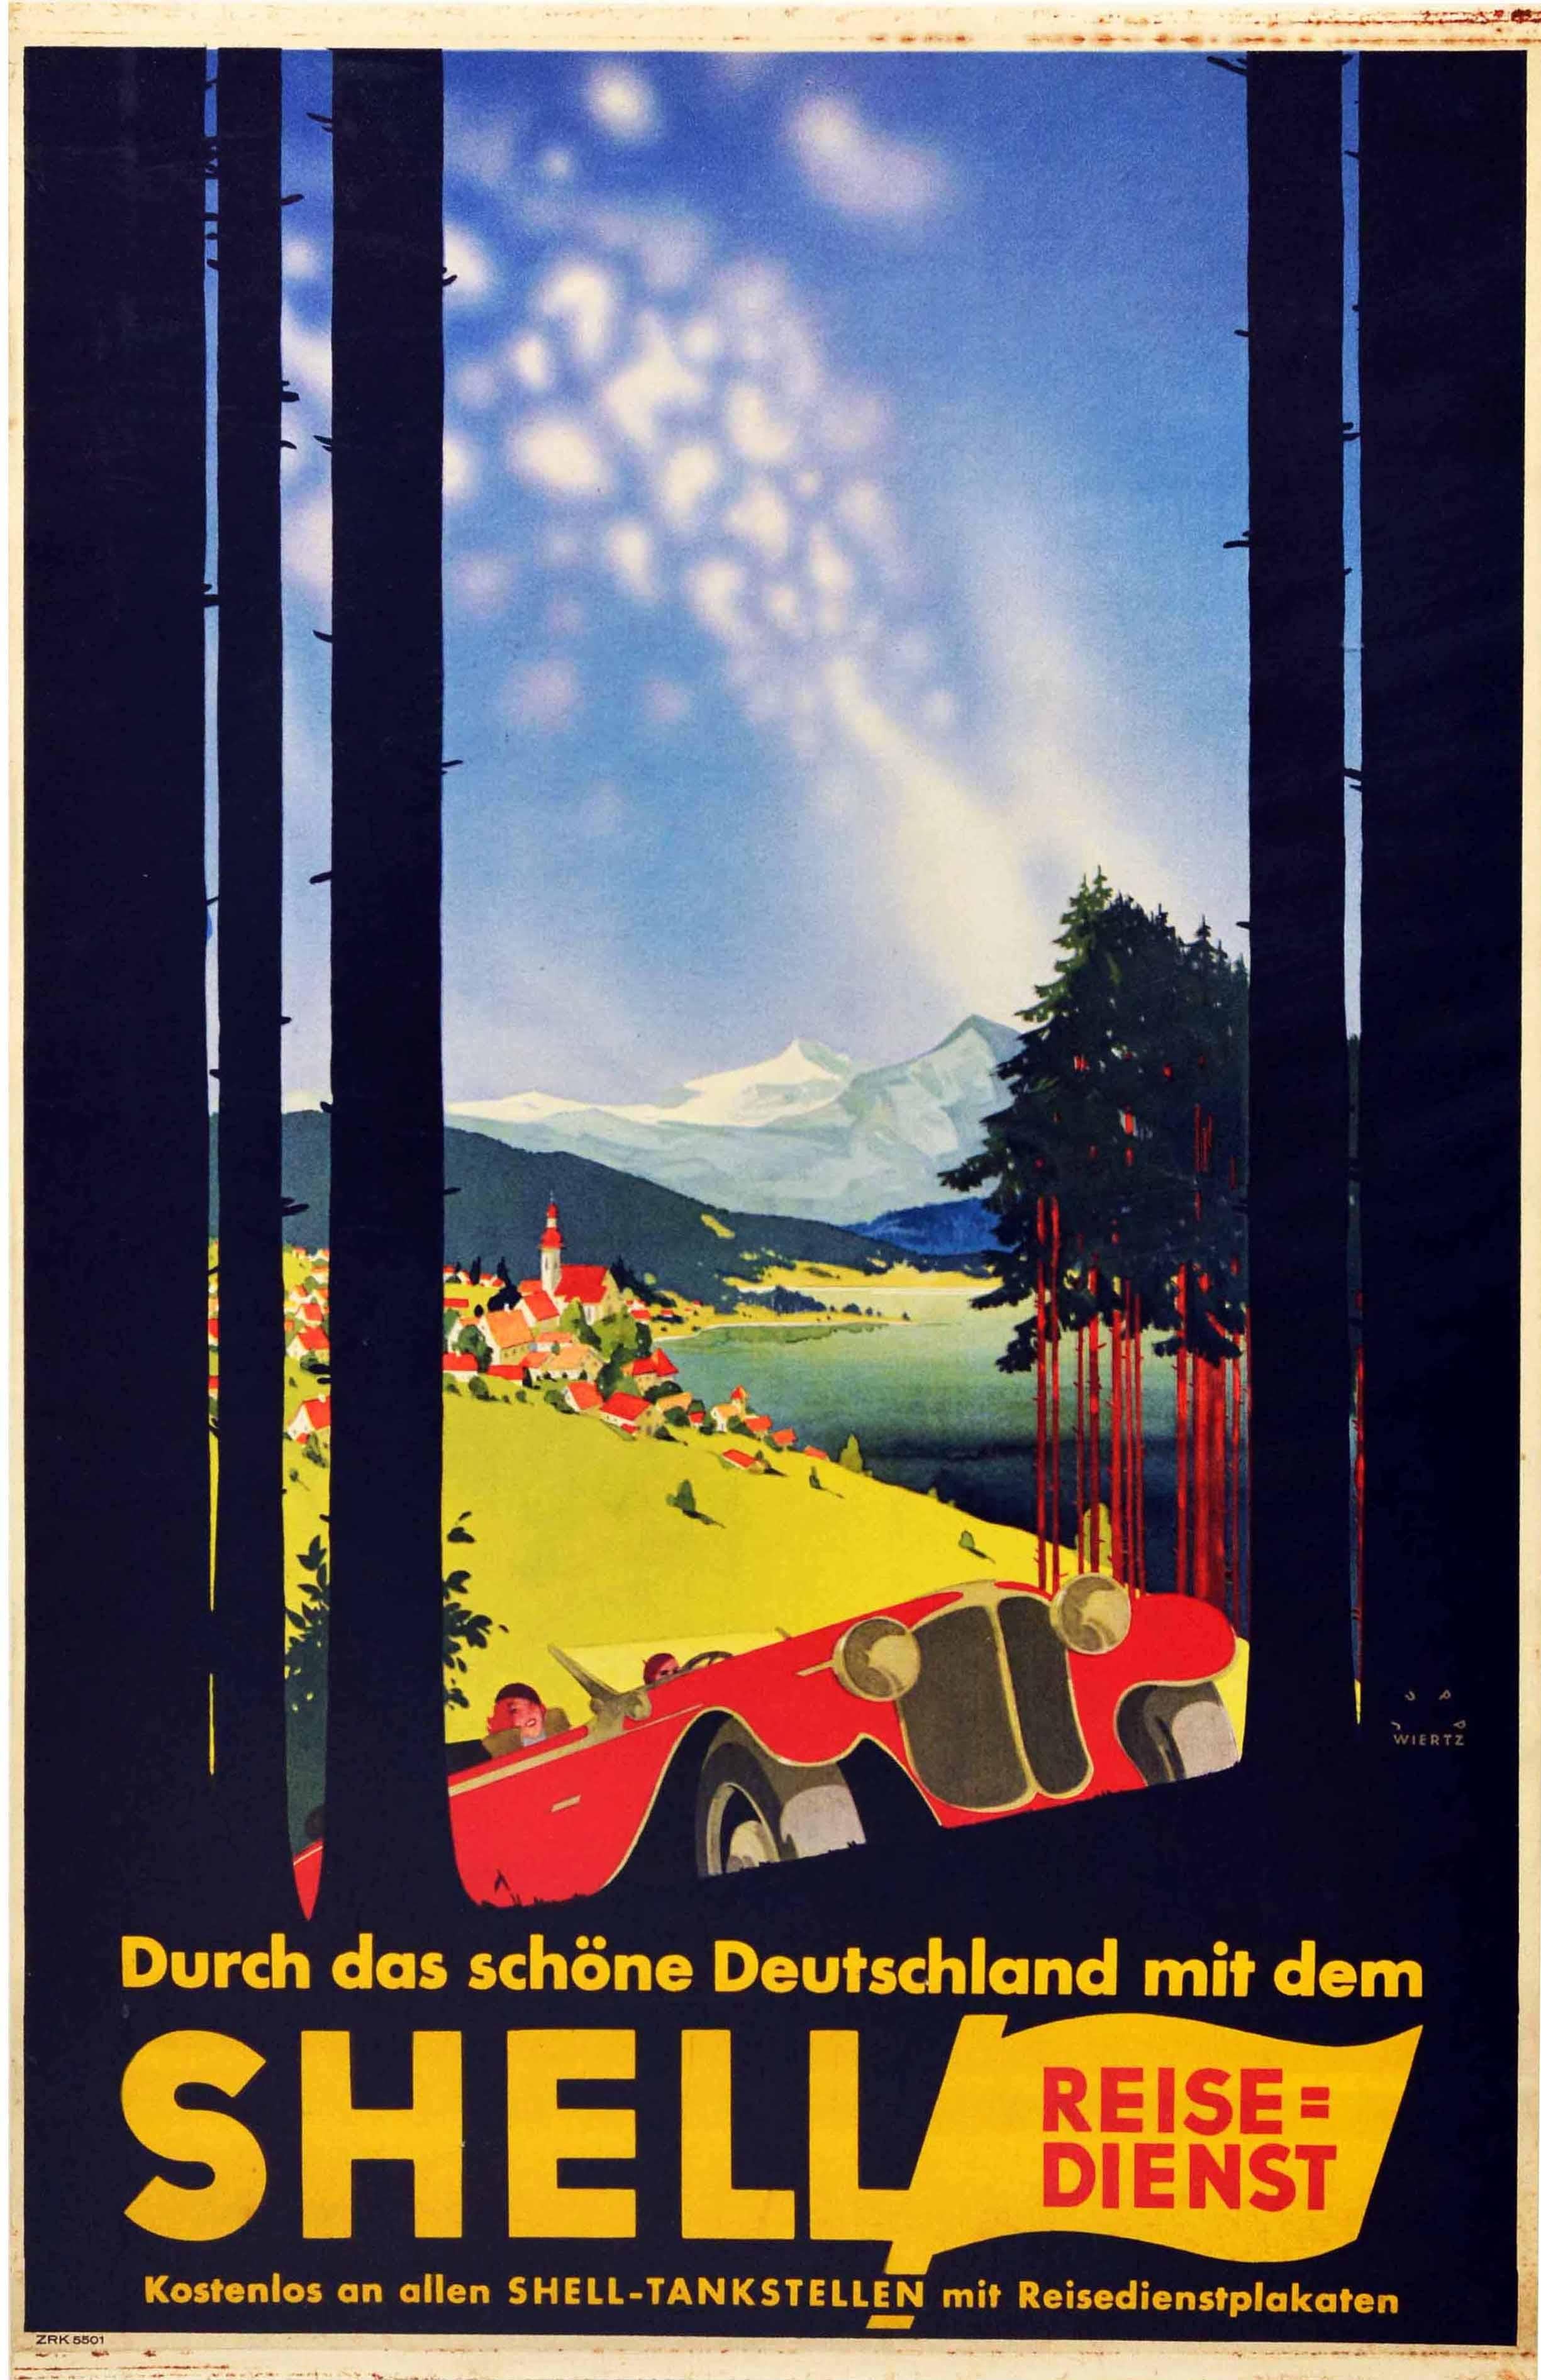 Original vintage advertising poster for Shell travel through Germany featuring Art Deco artwork by the renowned graphic artist Jupp Wiertz (Joseph Lambert Wiertz; 1888-1939) depicting a scenic countryside view through trees with a classic car